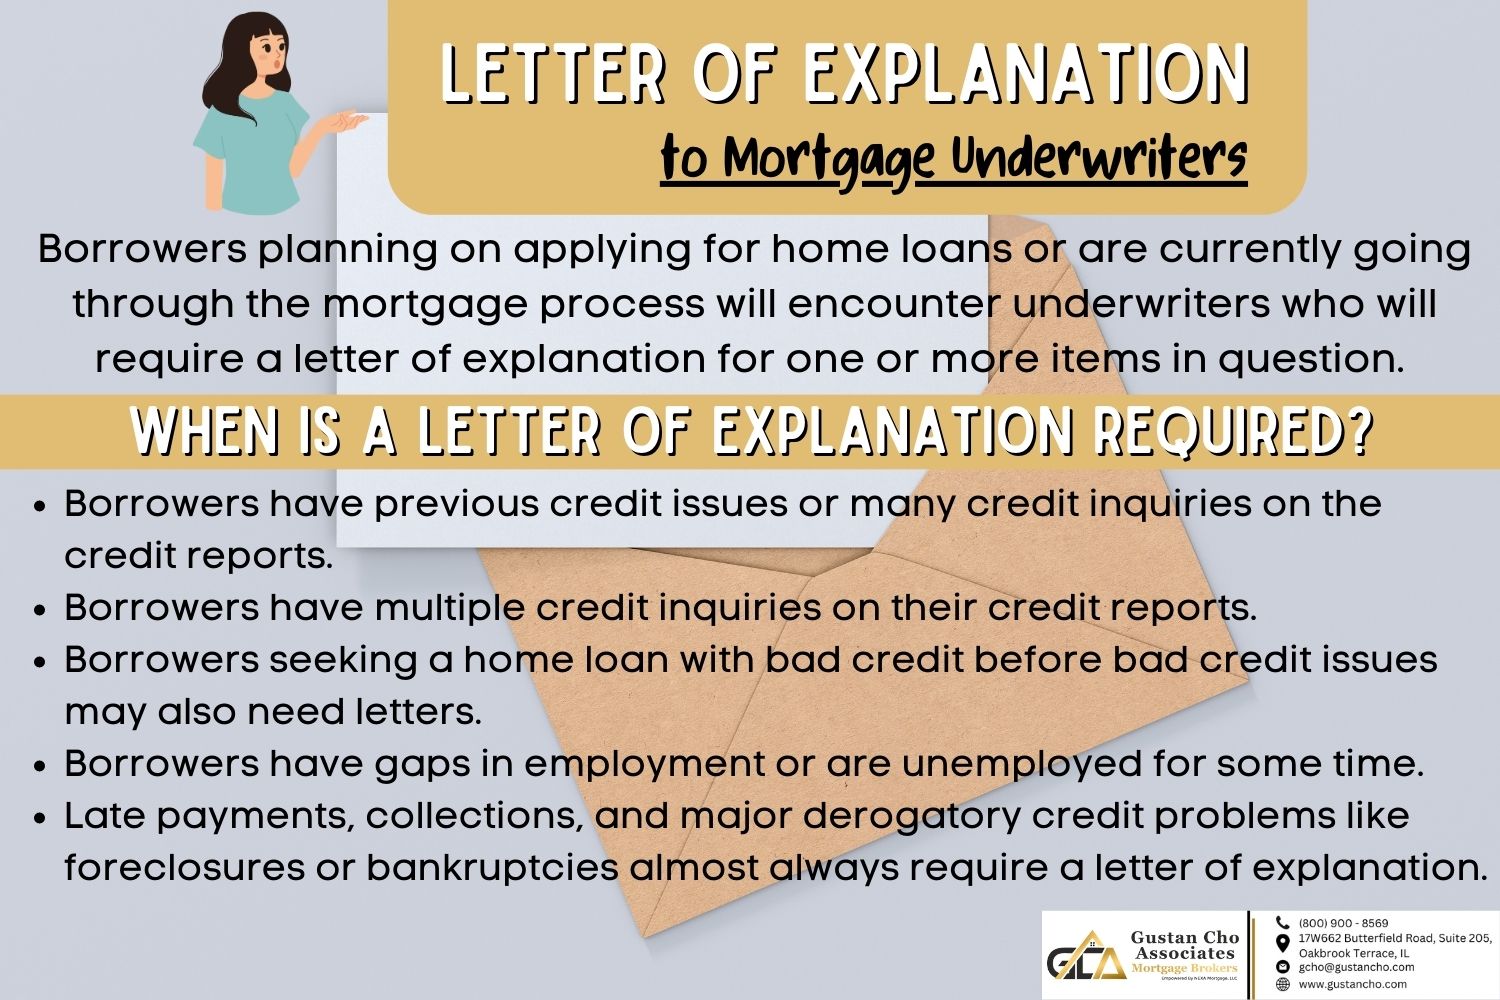 How To Write Letter of Explanations To Mortgage Underwriters